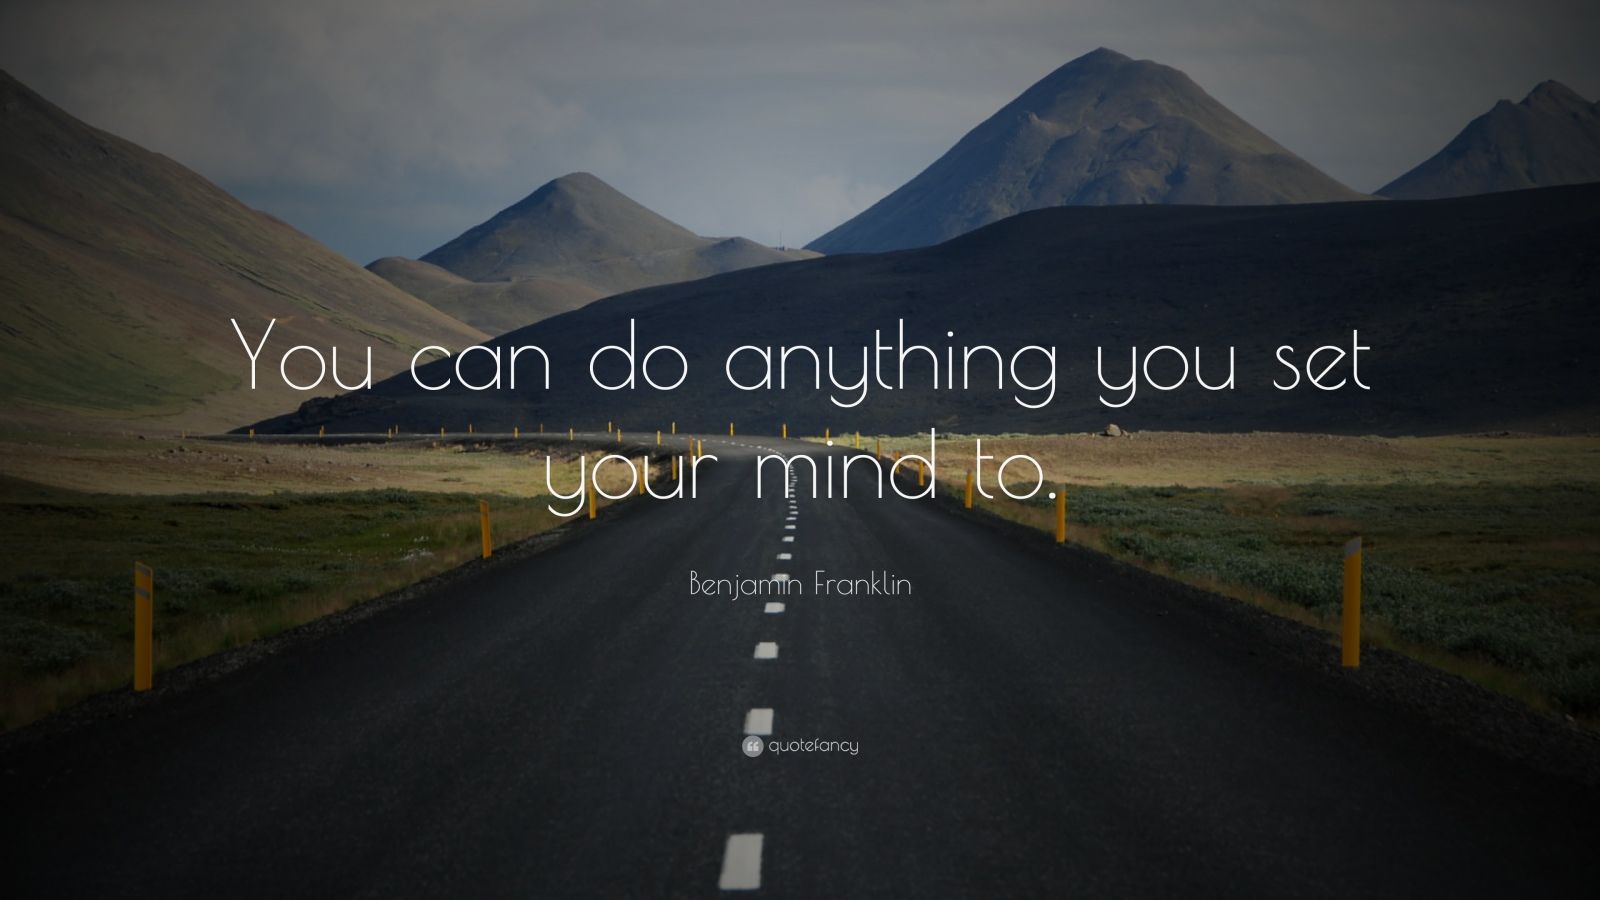 Benjamin Franklin Quote “You can do anything you set your